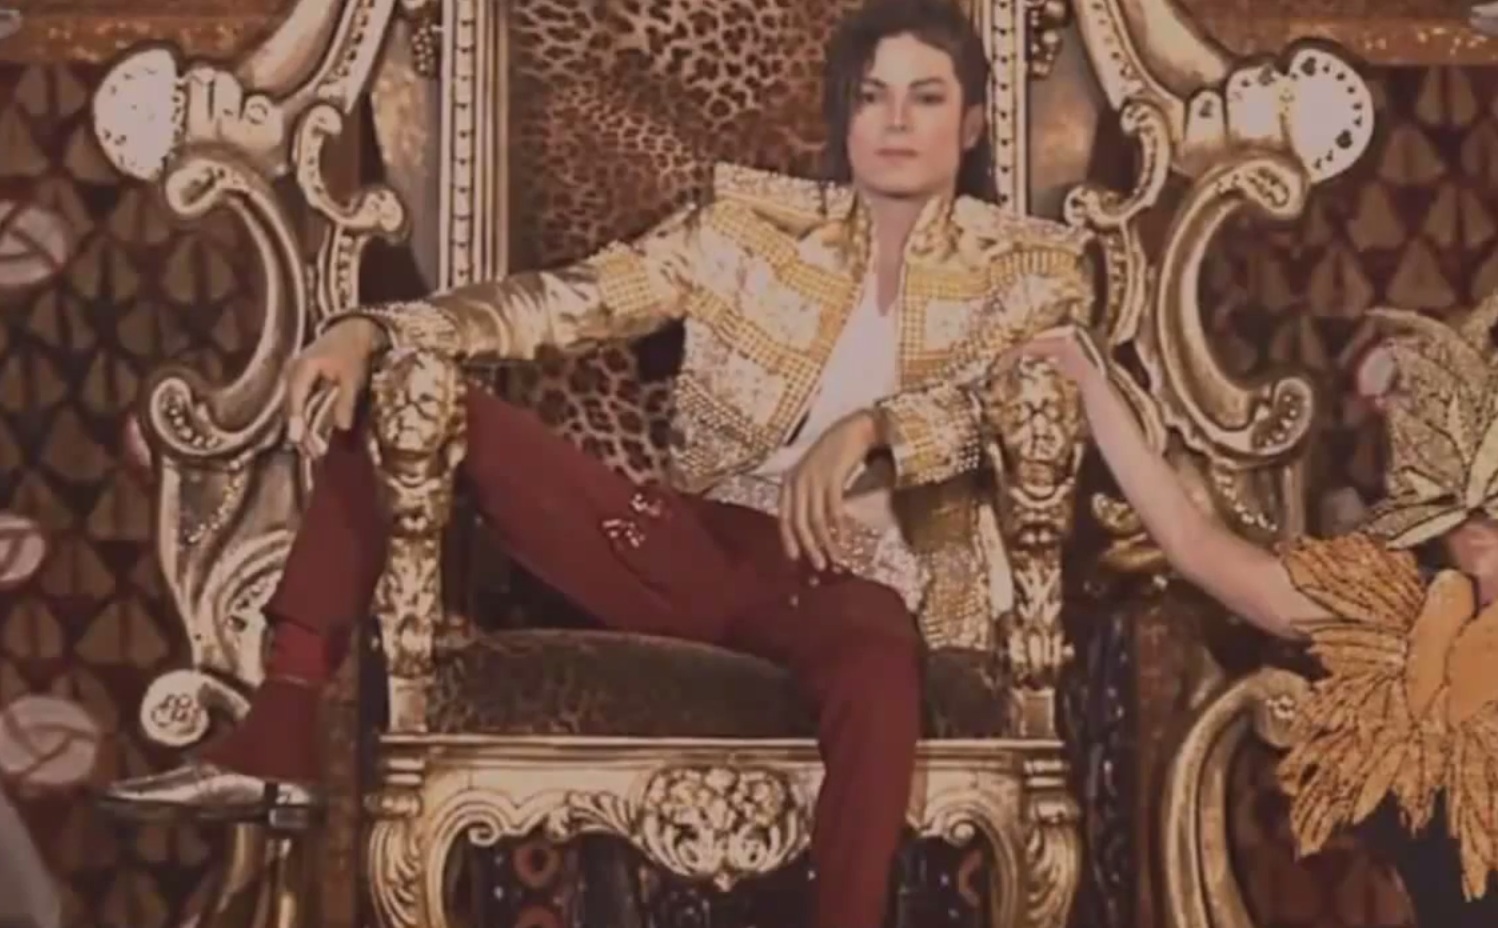 A Michael Jackson Hologram performance shocked fans at the 2014 Billboard Music Awards.